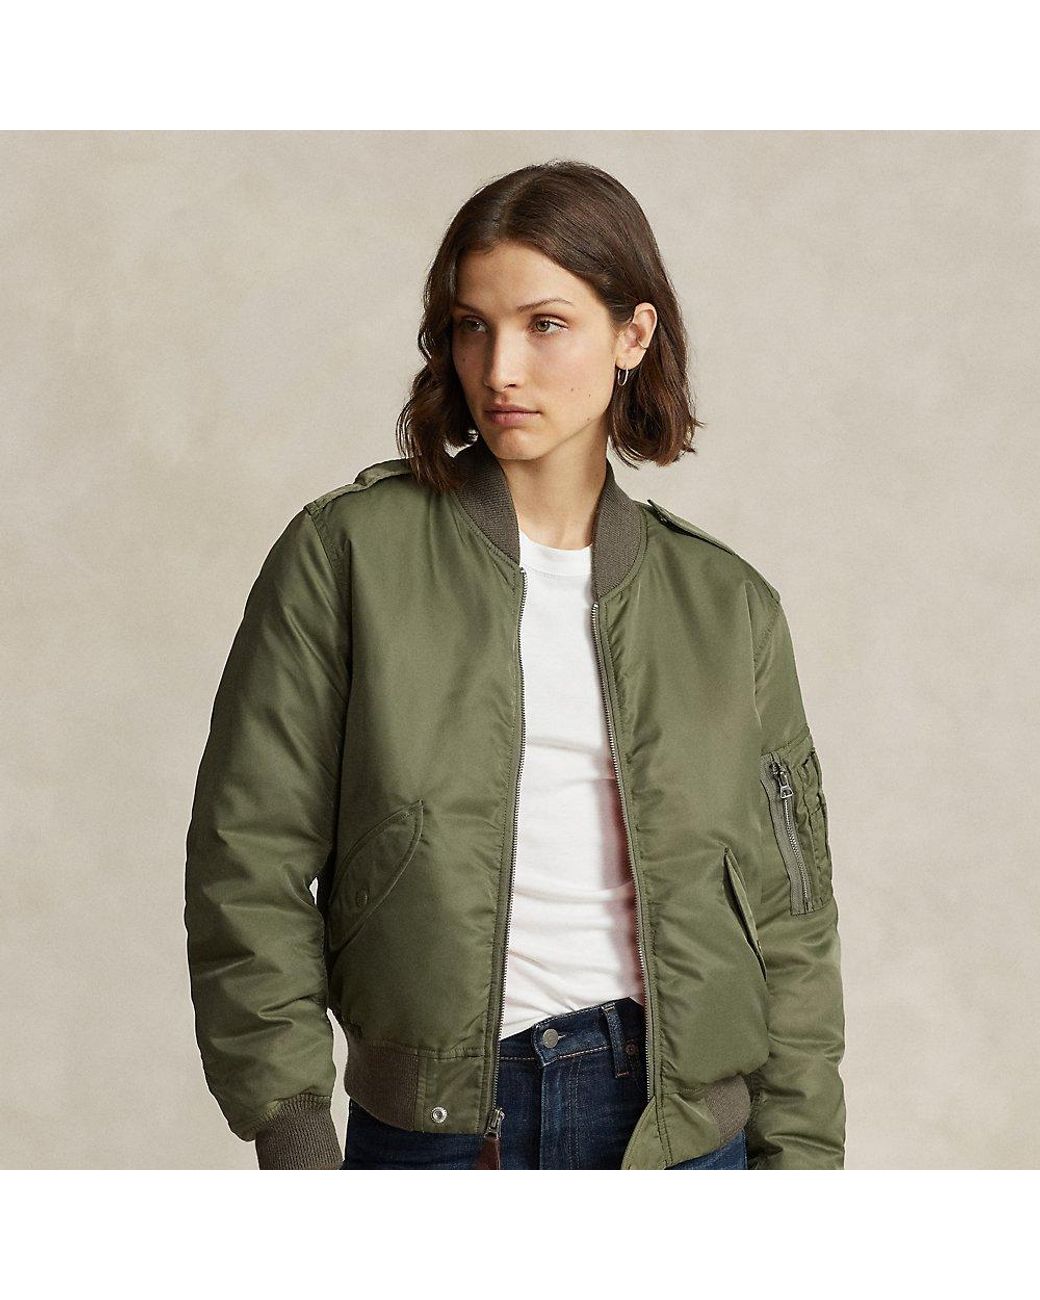 Polo Ralph Lauren Jackets for Women - Shop Now at Farfetch Canada